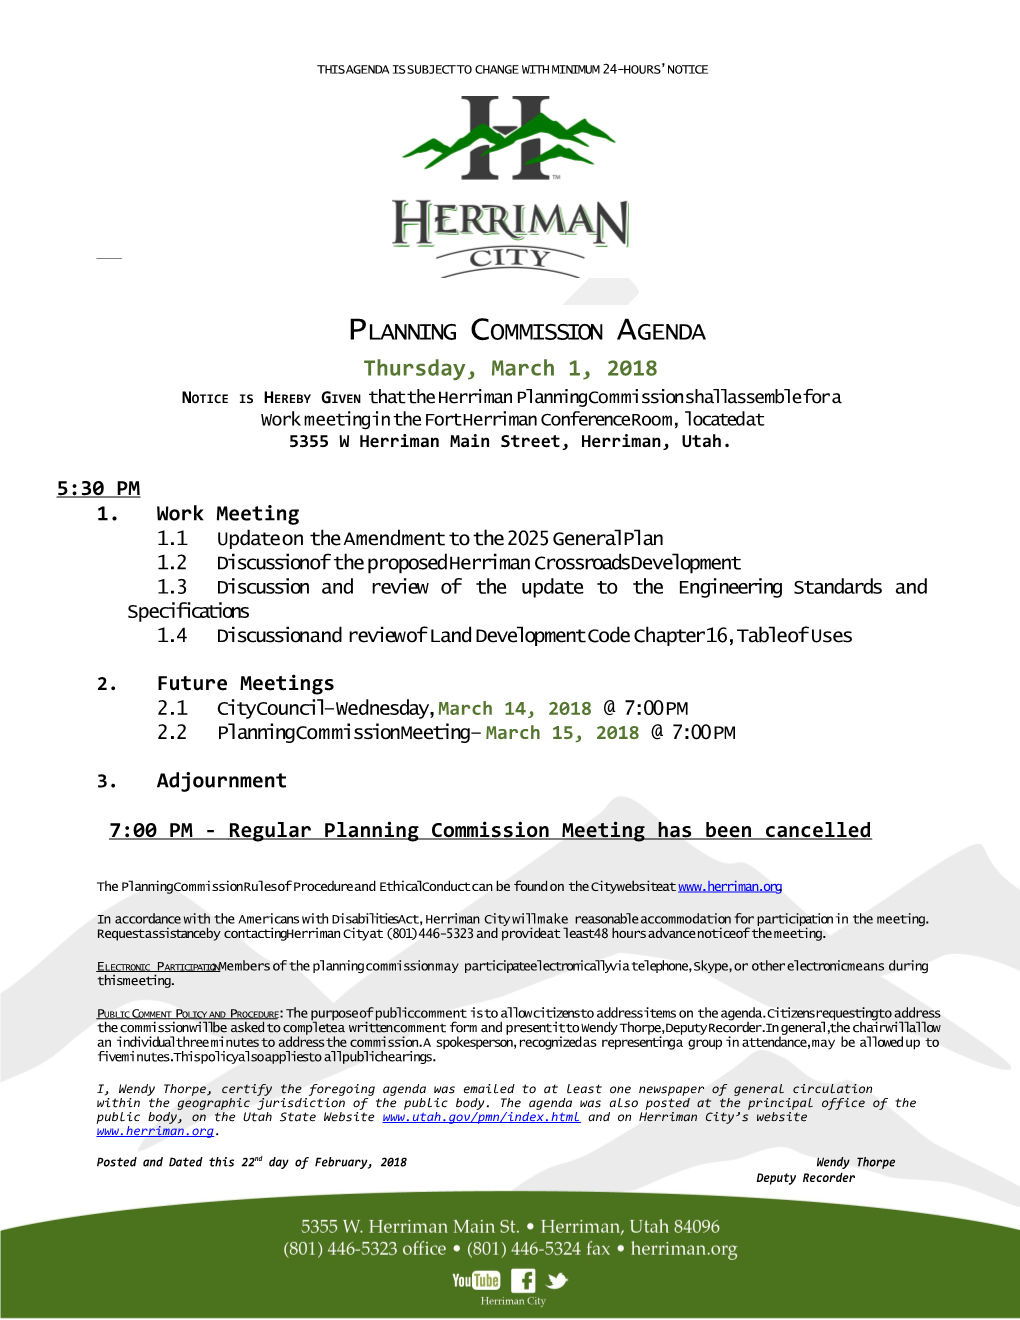 Notice Is Hereby Given That the Herriman Planning Commission Shall Assemble for A